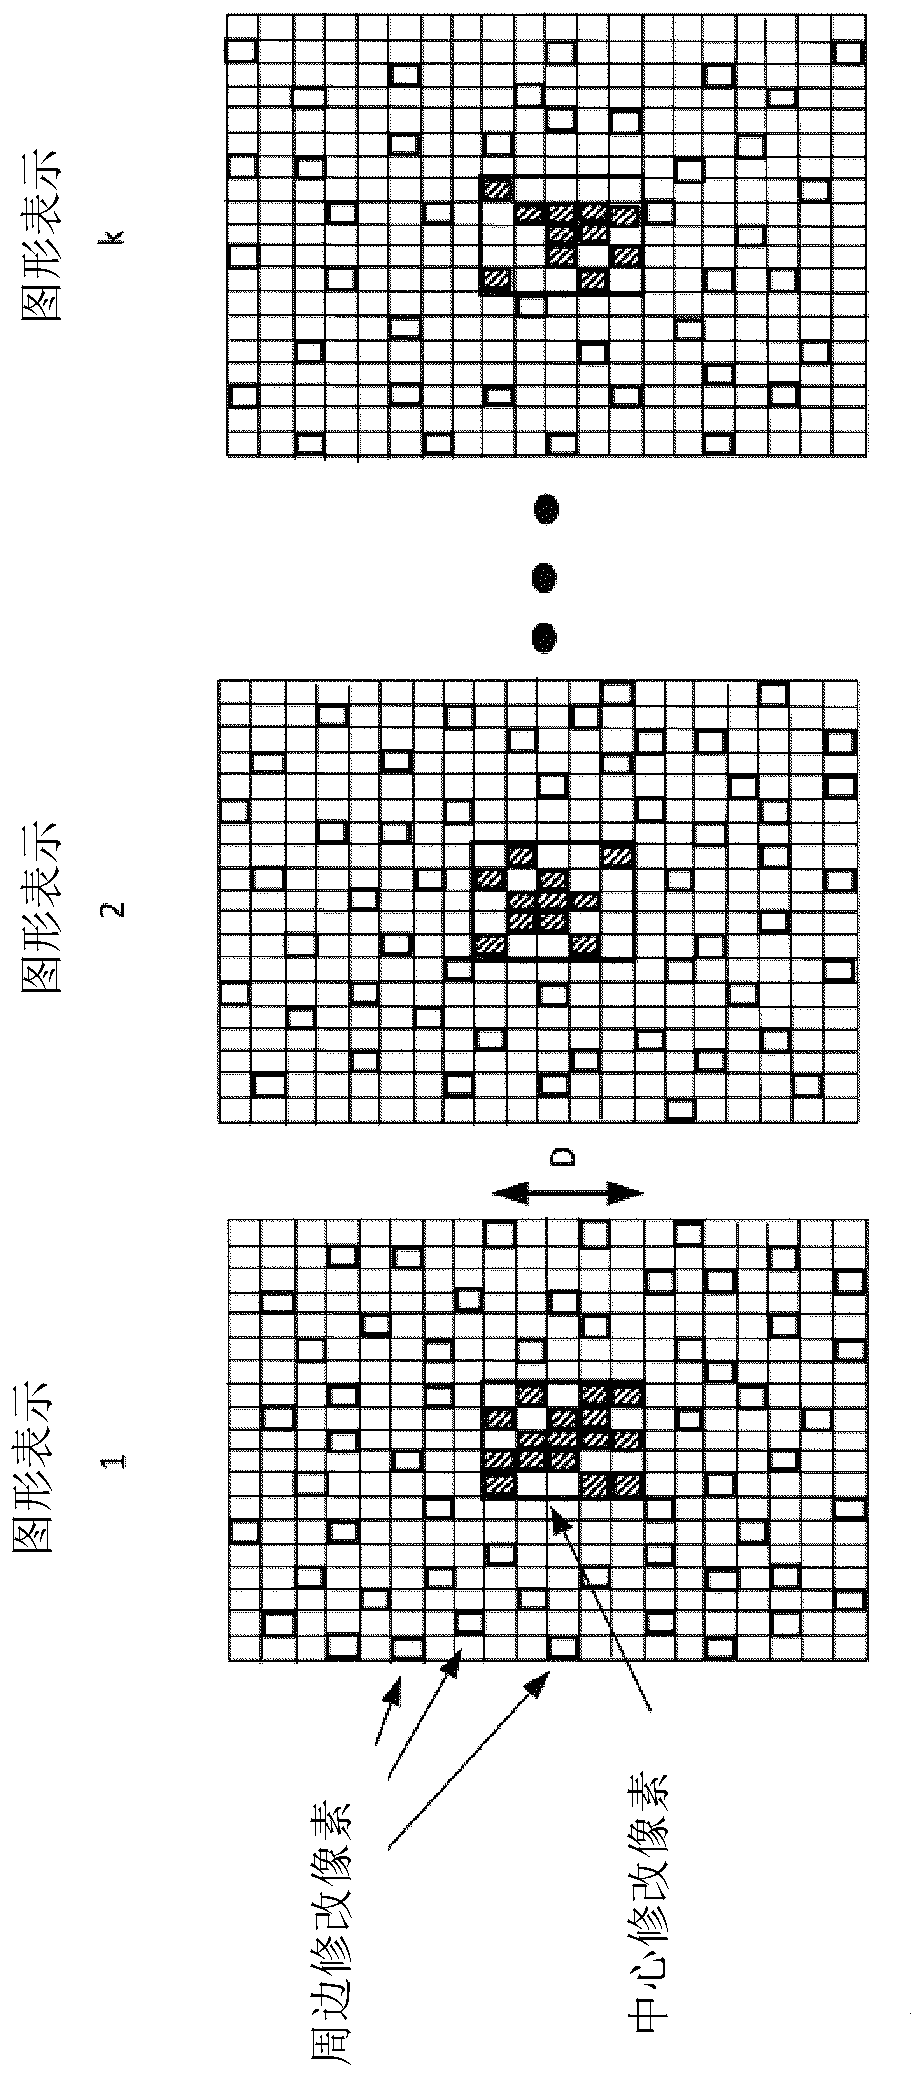 System and method for embedding a two dimensional code in video images